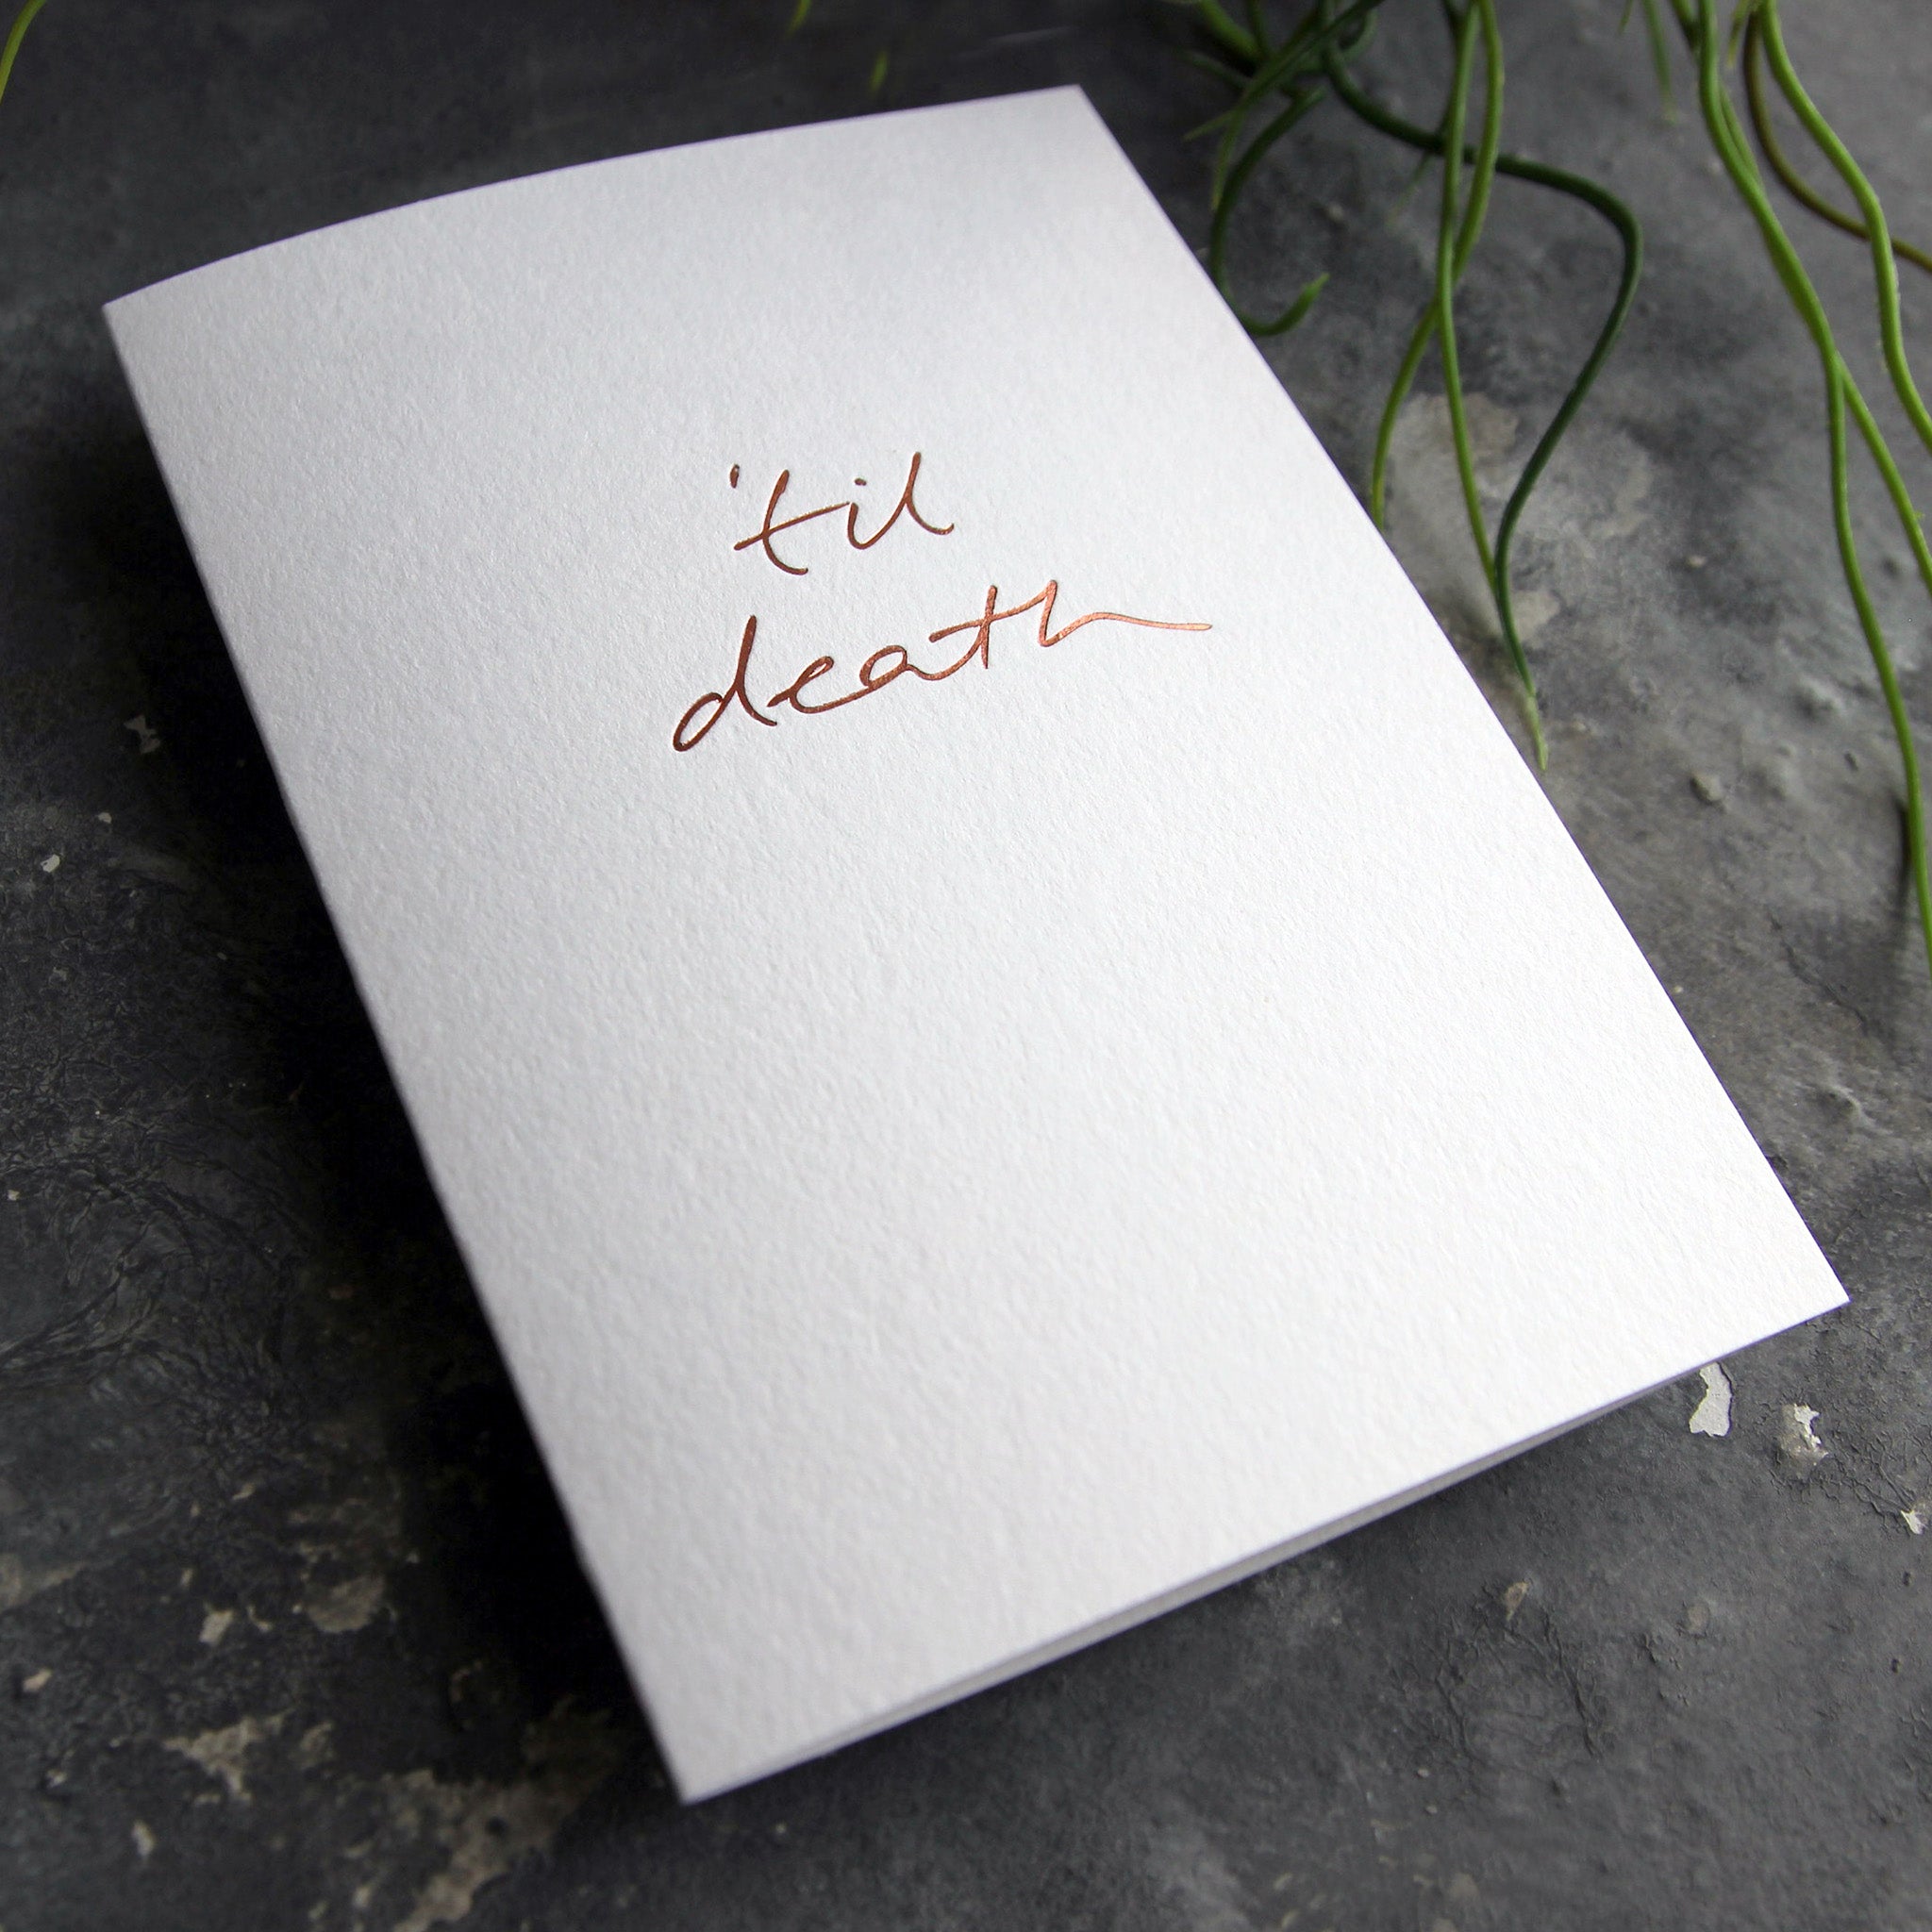 Luxury white greetings card with "Til Death" handwritten in the front and hand printed in rose gold foil on a grey background with some green plant leaves at the side.